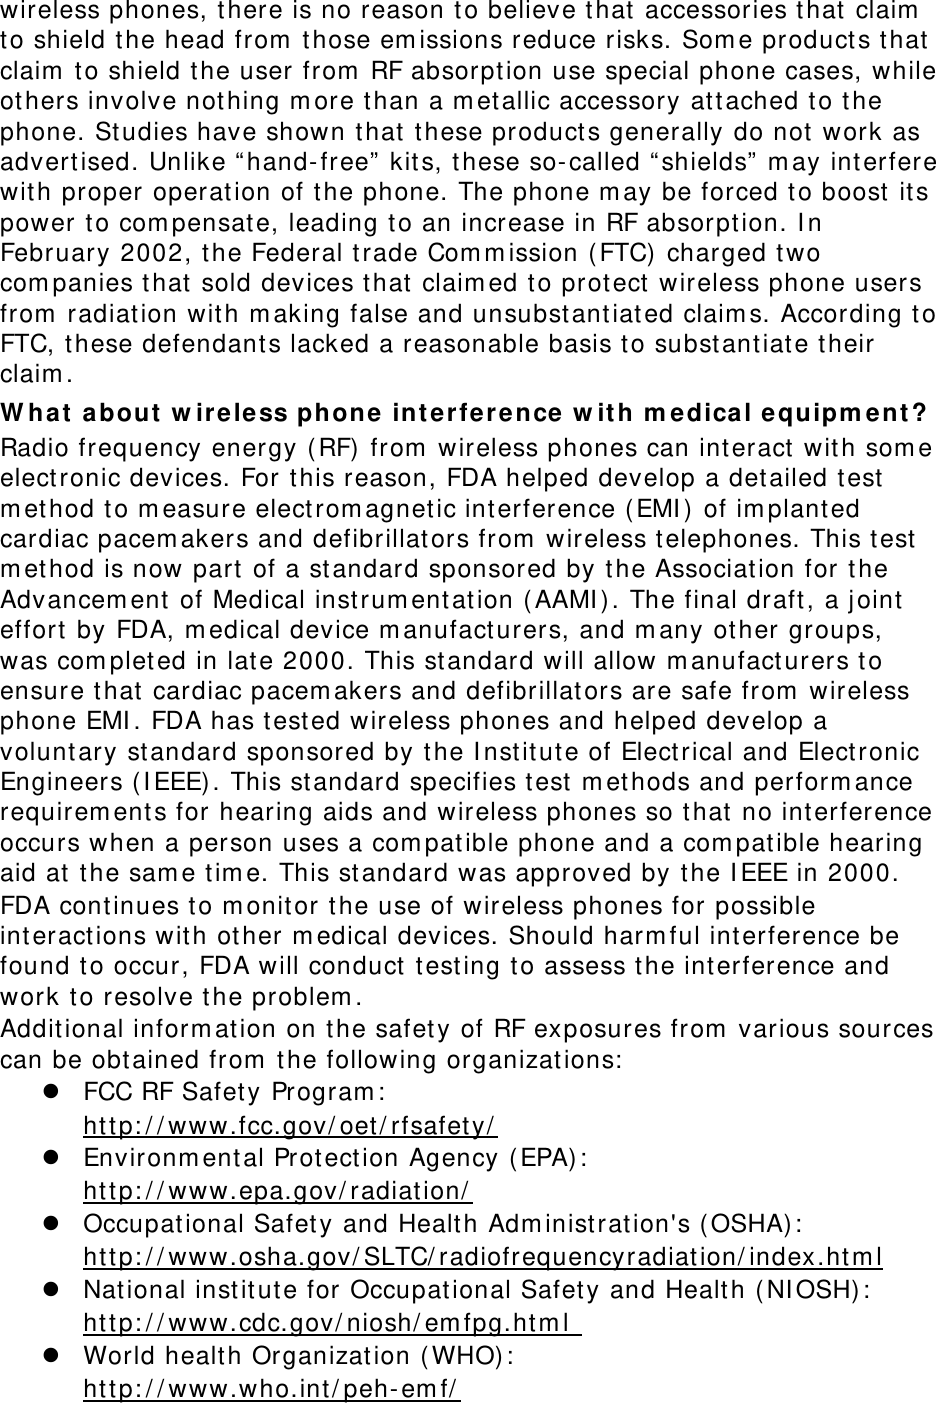 wireless phones, t here is no reason to believe that accessories that claim  to shield t he head from  t hose em issions reduce risks. Som e products that claim  to shield t he user from  RF absorpt ion use special phone cases, while others involve not hing m ore than a m etallic accessory att ached t o the phone. St udies have shown t hat these products generally do not work as advert ised. Unlike “ hand- free”  kit s, these so-called “ shields”  m ay int erfere with proper operation of t he phone. The phone m ay be forced t o boost  it s power t o com pensate, leading t o an increase in RF absorption. I n February 2002, t he Federal t rade Com m ission ( FTC)  charged t wo com panies that sold devices that claim ed t o prot ect  wireless phone users from  radiation wit h m aking false and unsubstantiated claim s. According to FTC, these defendant s lacked a reasonable basis to subst ant iat e their claim . W ha t  about  w irele ss phone int erferen ce w it h m edical equipm ent ? Radio frequency energy ( RF)  from  wireless phones can int eract with som e elect ronic devices. For this reason, FDA helped develop a detailed test m ethod to m easure elect rom agnetic interference ( EMI )  of im plant ed cardiac pacem akers and defibrillat ors from  wireless t elephones. This t est  m ethod is now part of a st andard sponsored by t he Association for t he Advancem ent  of Medical inst rum ent at ion ( AAMI ) . The final draft , a j oint  effort  by FDA, m edical device m anufacturers, and m any other groups, was com plet ed in late 2000. This st andard will allow m anufacturers to ensure t hat  cardiac pacem akers and defibrillat ors are safe from  wireless phone EMI . FDA has test ed wireless phones and helped develop a voluntary st andard sponsored by t he I nst itut e of Elect rical and Elect ronic Engineers (I EEE) . This st andard specifies test m ethods and perform ance requirem ent s for hearing aids and wireless phones so that no interference occurs when a person uses a com pat ible phone and a com patible hearing aid at the sam e tim e. This st andard was approved by t he I EEE in 2000. FDA continues t o m onitor the use of wireless phones for possible int eractions wit h other m edical devices. Should harm ful int erference be found t o occur, FDA will conduct  t est ing t o assess the int erference and work to resolve t he problem . Additional inform at ion on t he safety of RF exposures from  various sources can be obtained from  t he following organizations:   FCC RF Safety Program :   http: / / www.fcc.gov/ oet / rfsafet y/   Environm ent al Protect ion Agency ( EPA) :   http: / / www.epa.gov/ radiation/   Occupat ional Safety and Health Adm inistrat ion&apos;s ( OSHA) :          ht t p: / / www.osha.gov/ SLTC/ radiofrequencyradiation/ index.htm l  National inst itute for Occupational Safety and Health ( NI OSH):   http: / / www.cdc.gov/ niosh/ em fpg.ht m l   World healt h Organization ( WHO) :   http: / / www.who.int / peh- em f/  